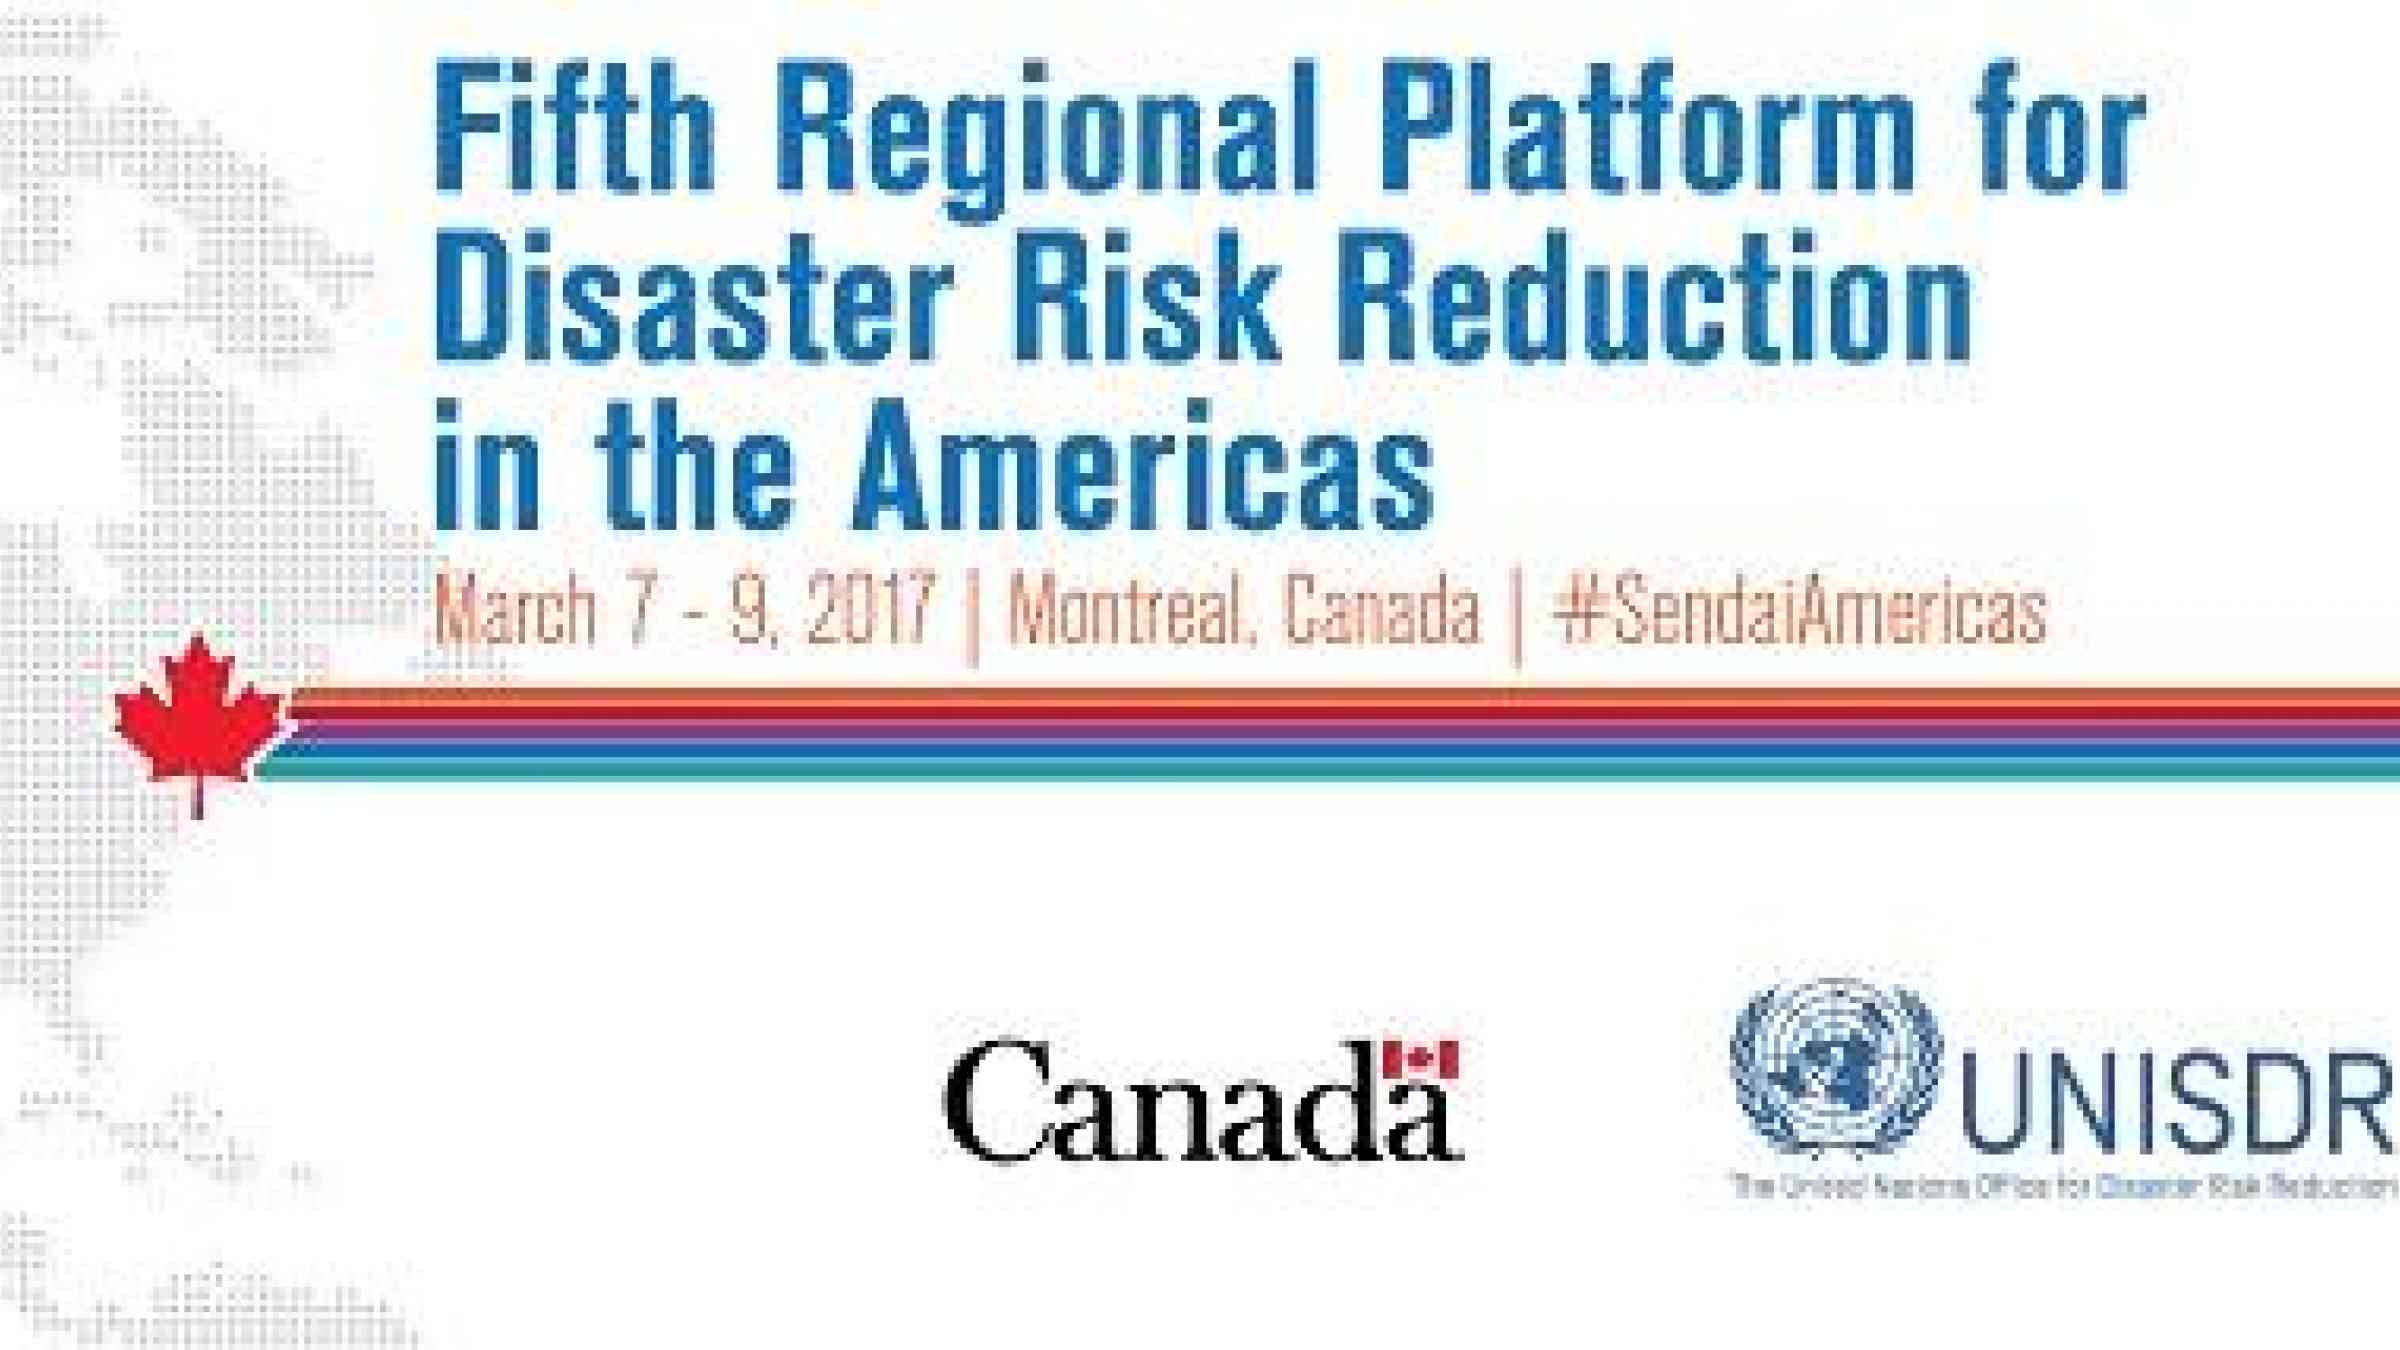 The 5th Regional Platform for Disaster Risk Reduction in the Americas is a key step on the road to greater resilience to natural and human-induced hazards